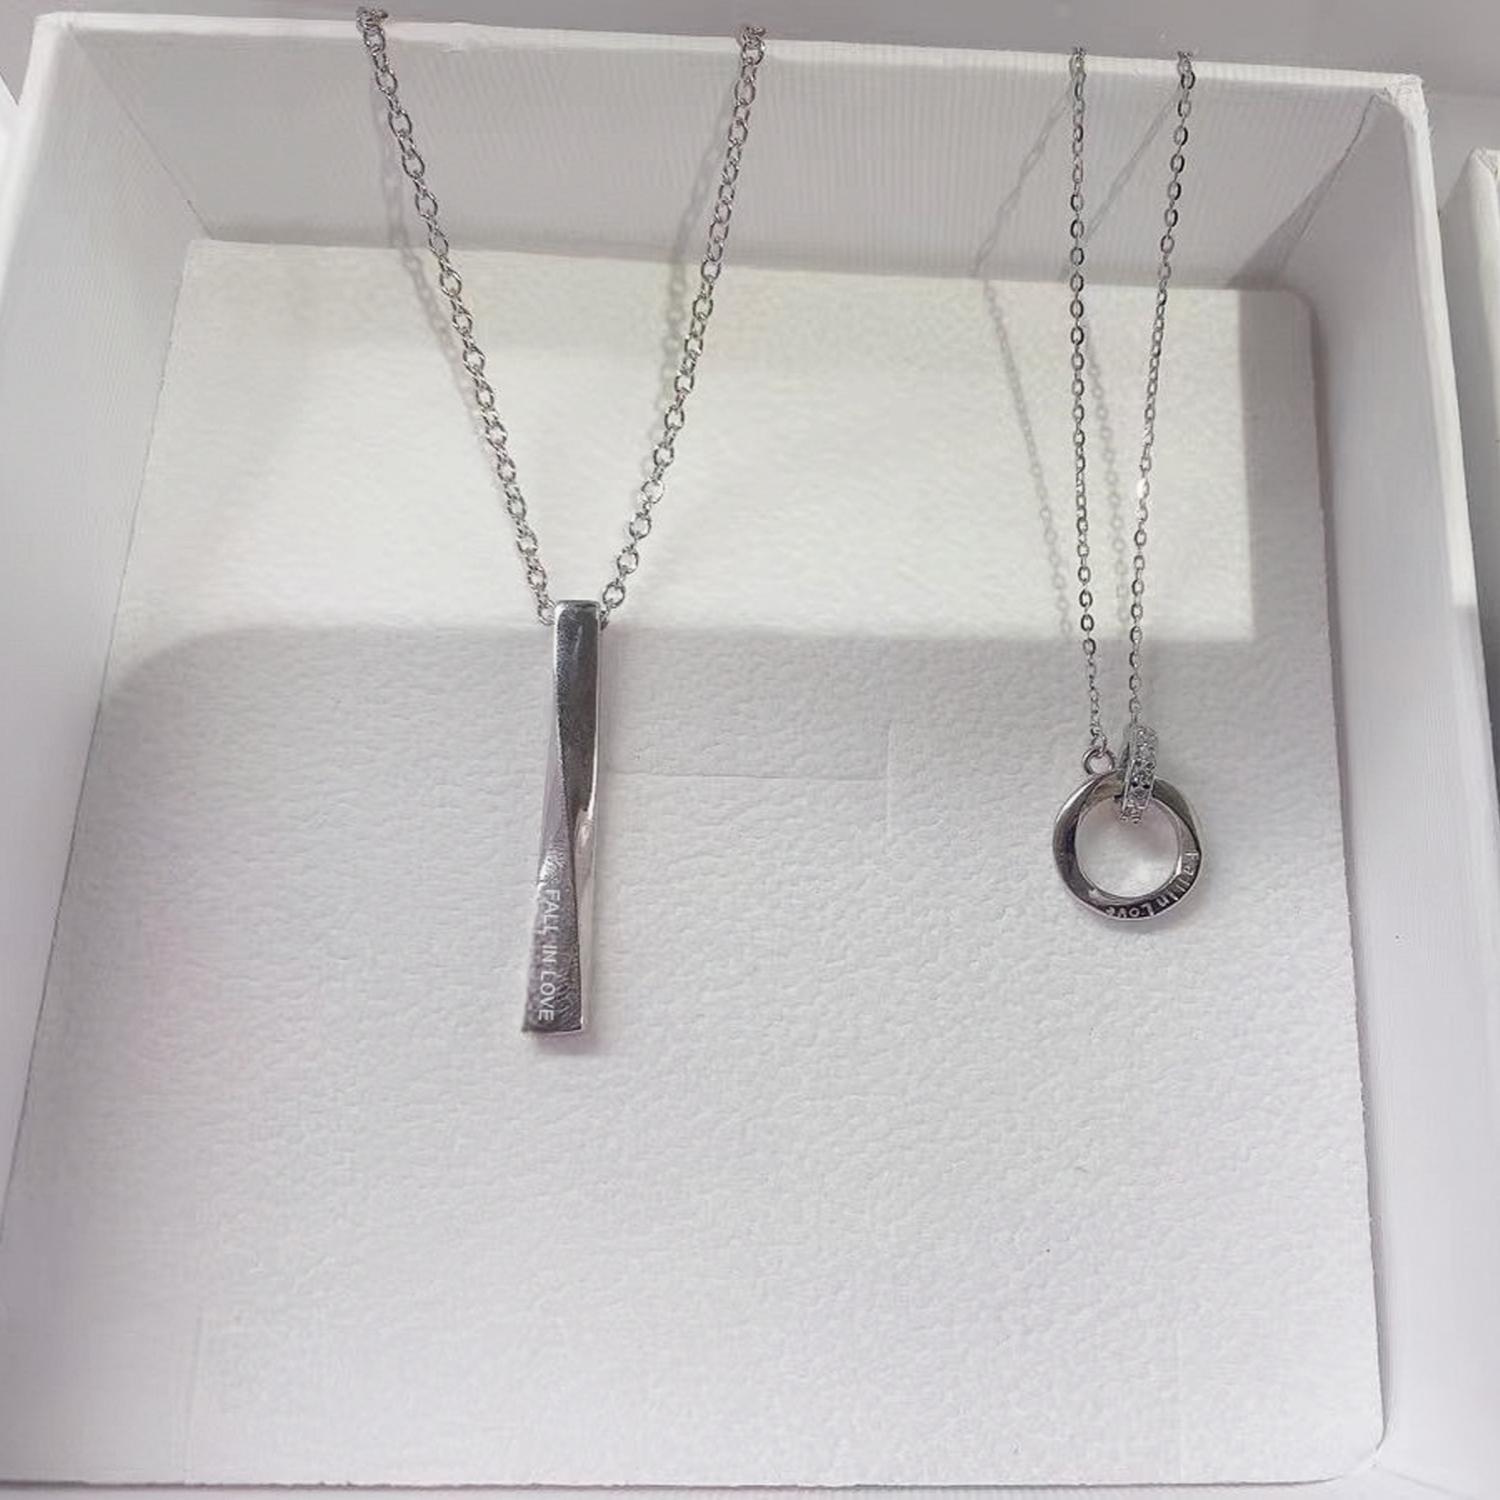 Unique Fall In Love Matching Infinity Couple Necklaces In Sterling Silver - CoupleSets